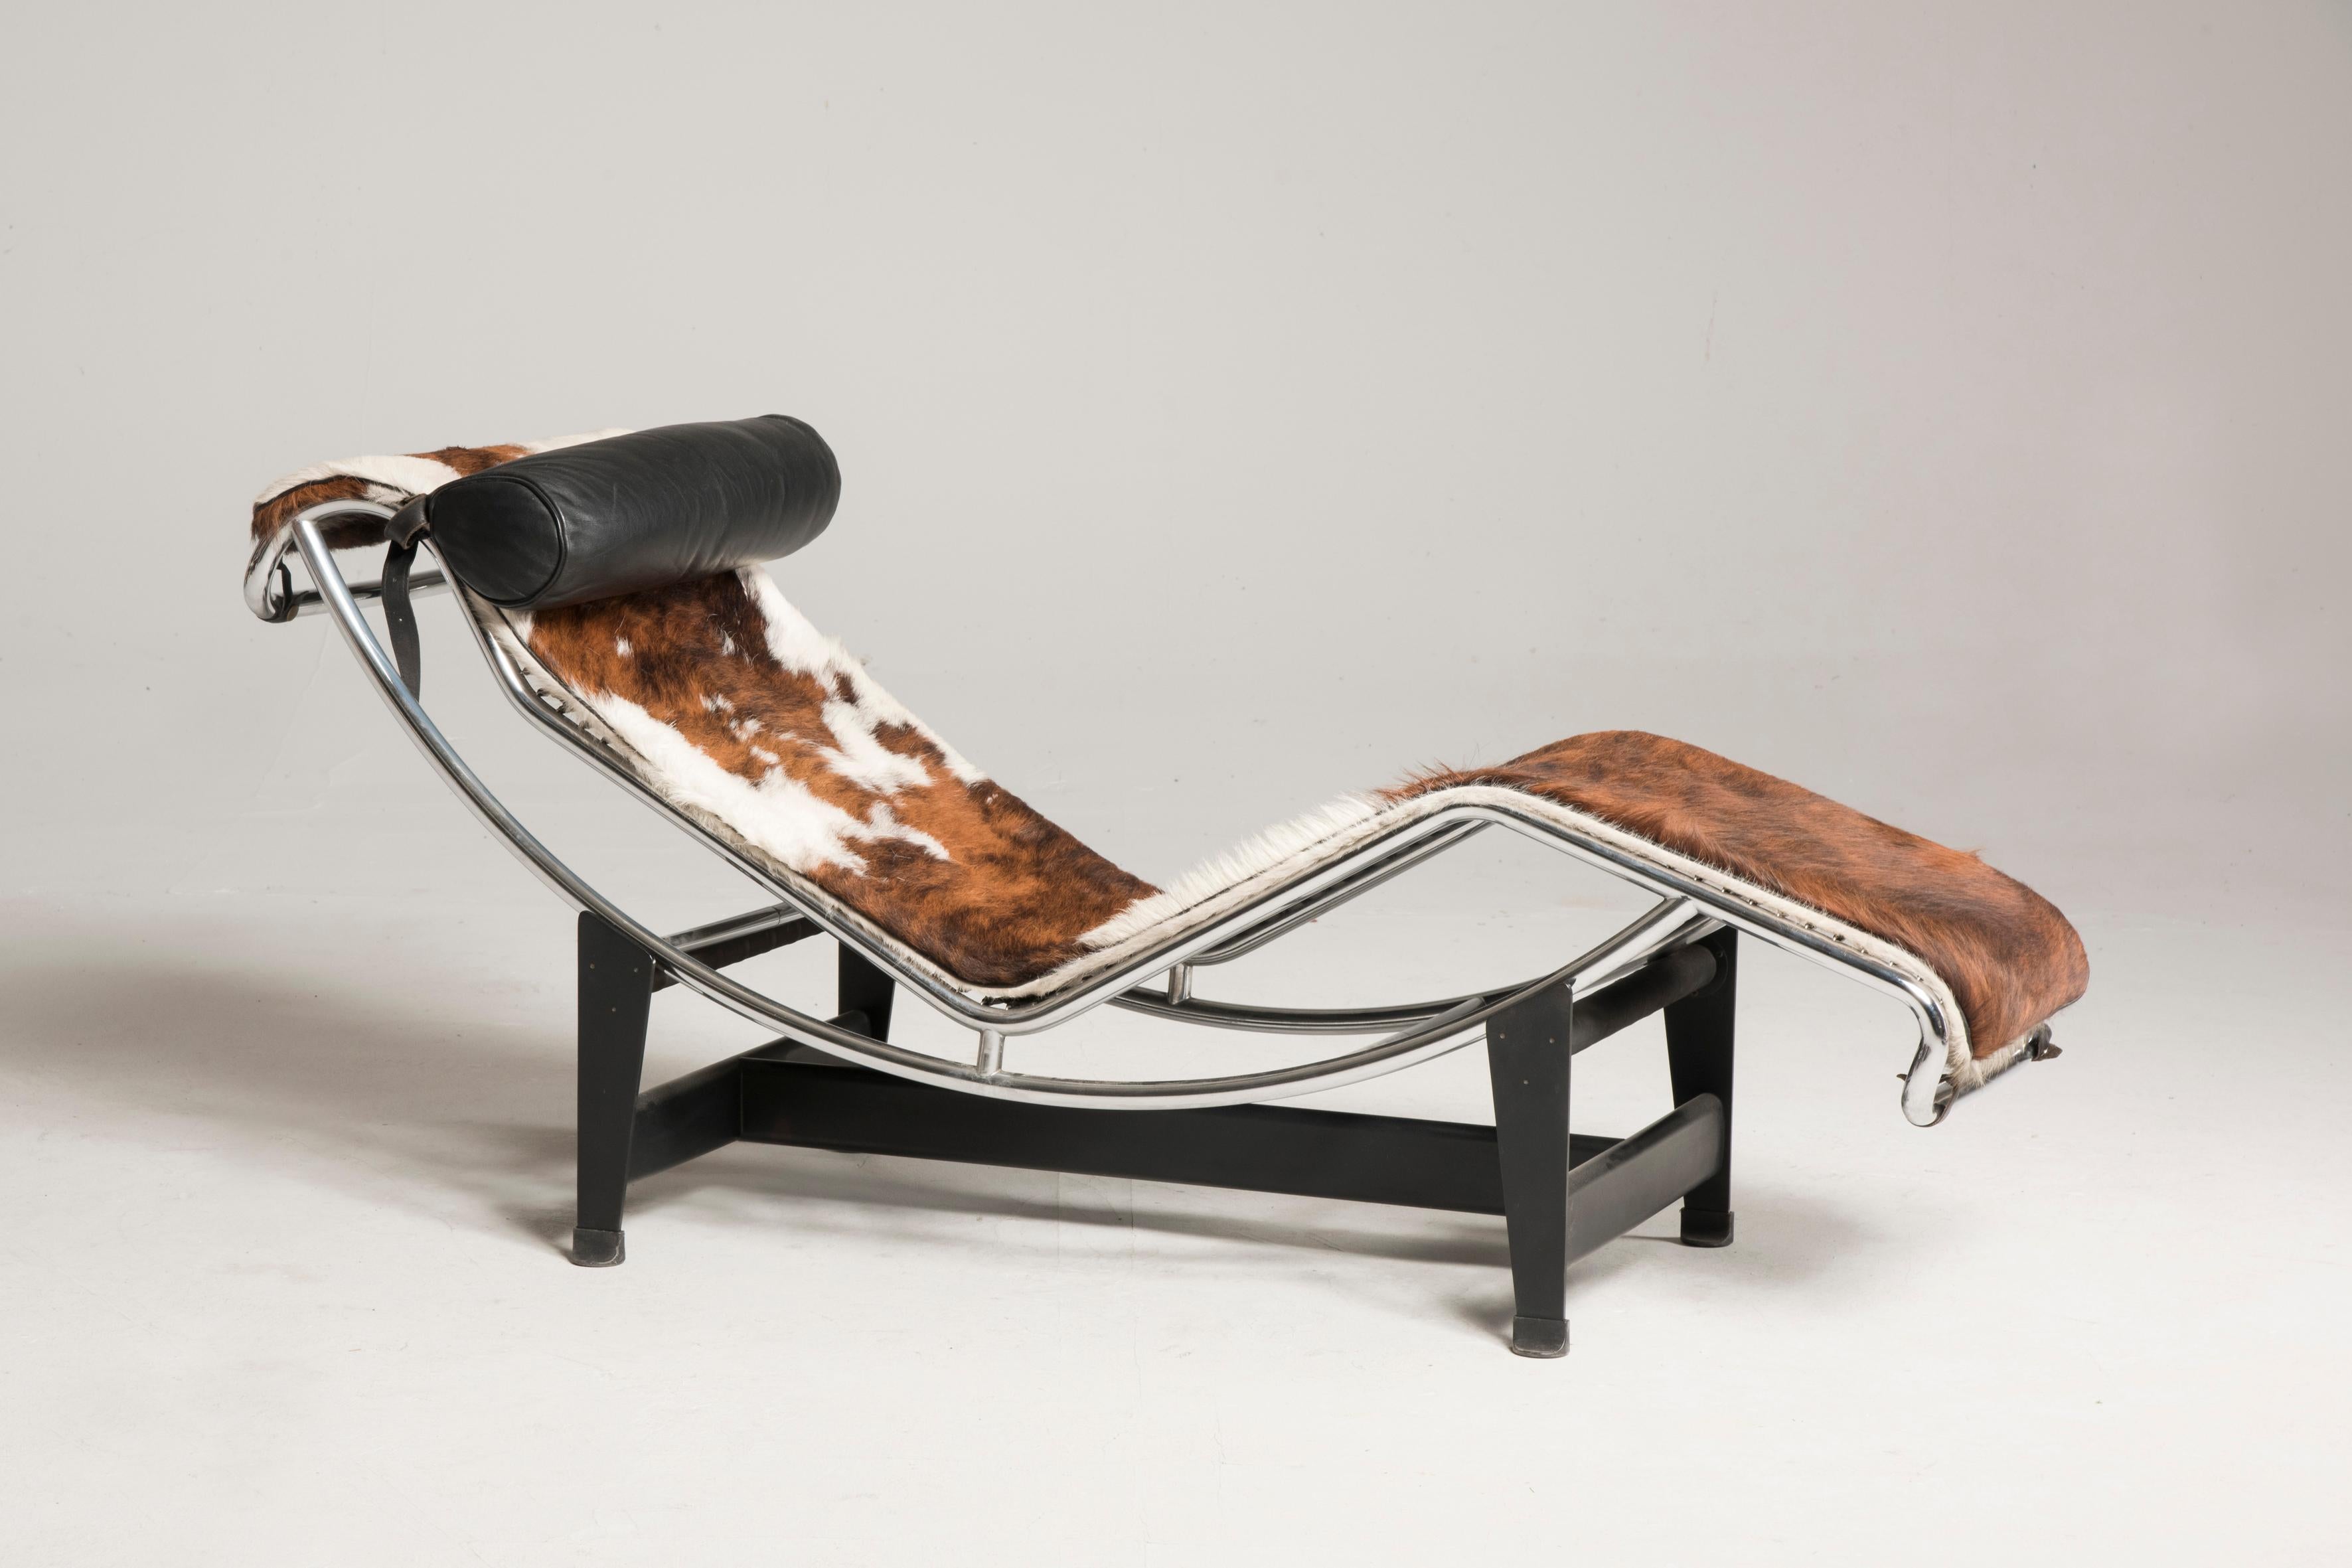 LC4 chaise lounge - Design icon of the 20th century, Designed in 1928 by Le Corbusier, Pierre Jeanneret and Charlotte Perriand and made famous since 1965 by Cassina. Exemplary signed and numbered (low serial number to mean that it is part of the